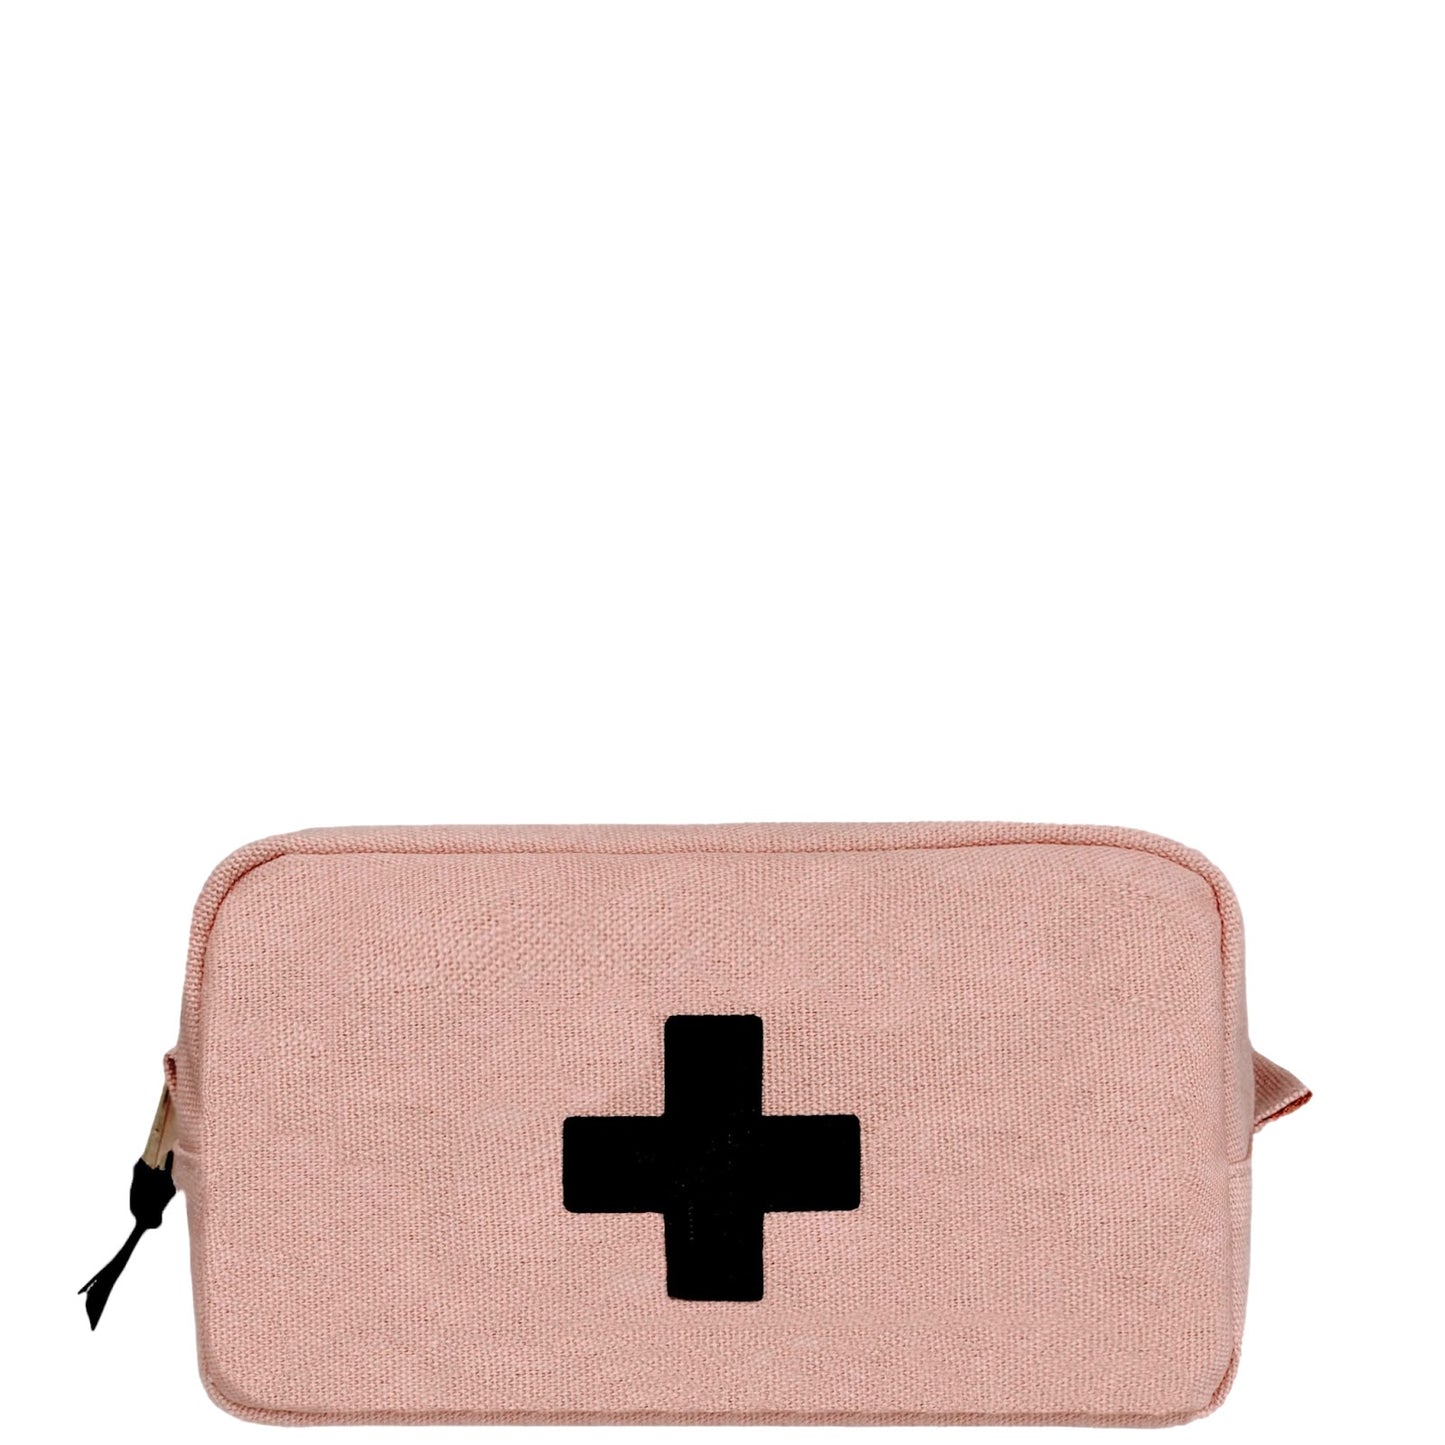 First Aid Organizing Pouch, Pink/Blush